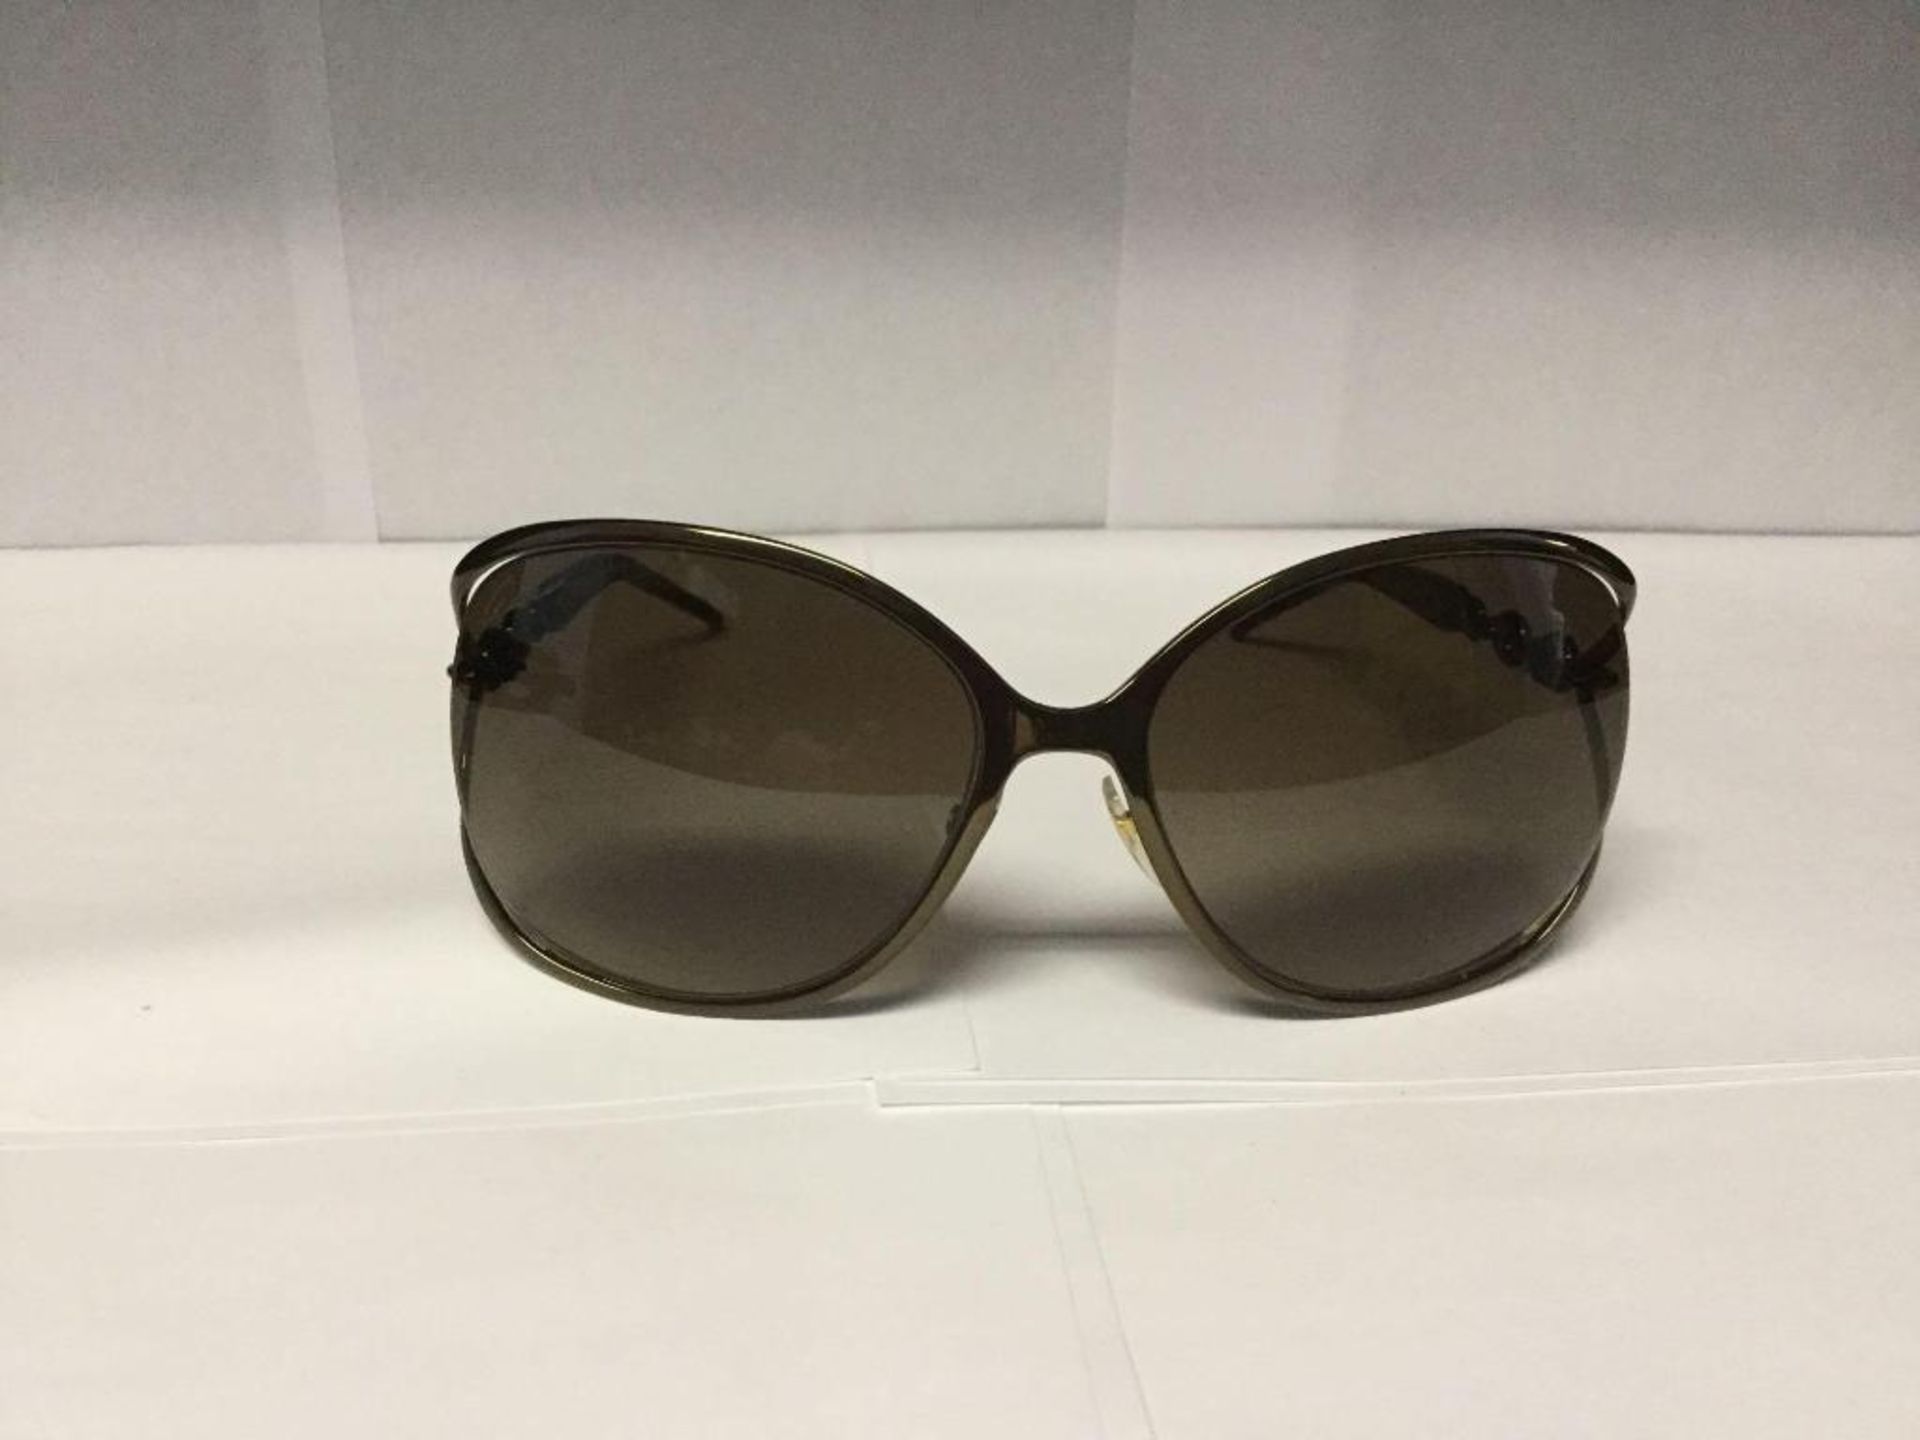 Gucci Sunglasses with Case - Value $200 - Image 3 of 3